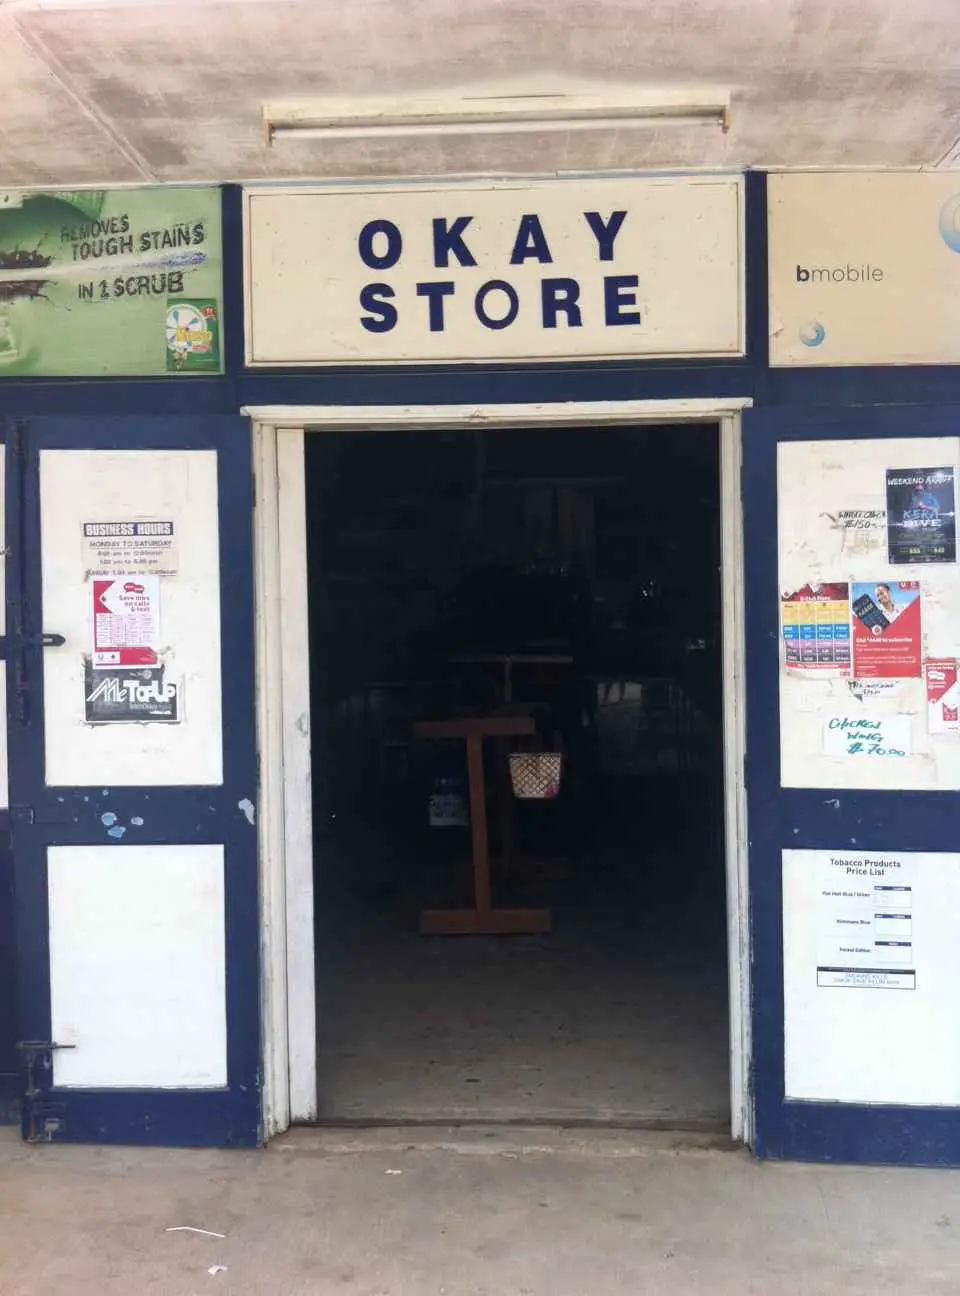 Mmm Kay | Solomon Islands Travel Blog | The 'Okay' Store! It'S Better Than A Bad One! | Funny Shop Names, Gizo, Okay Store, Solomon Islands | Author: Anthony Bianco - The Travel Tart Blog